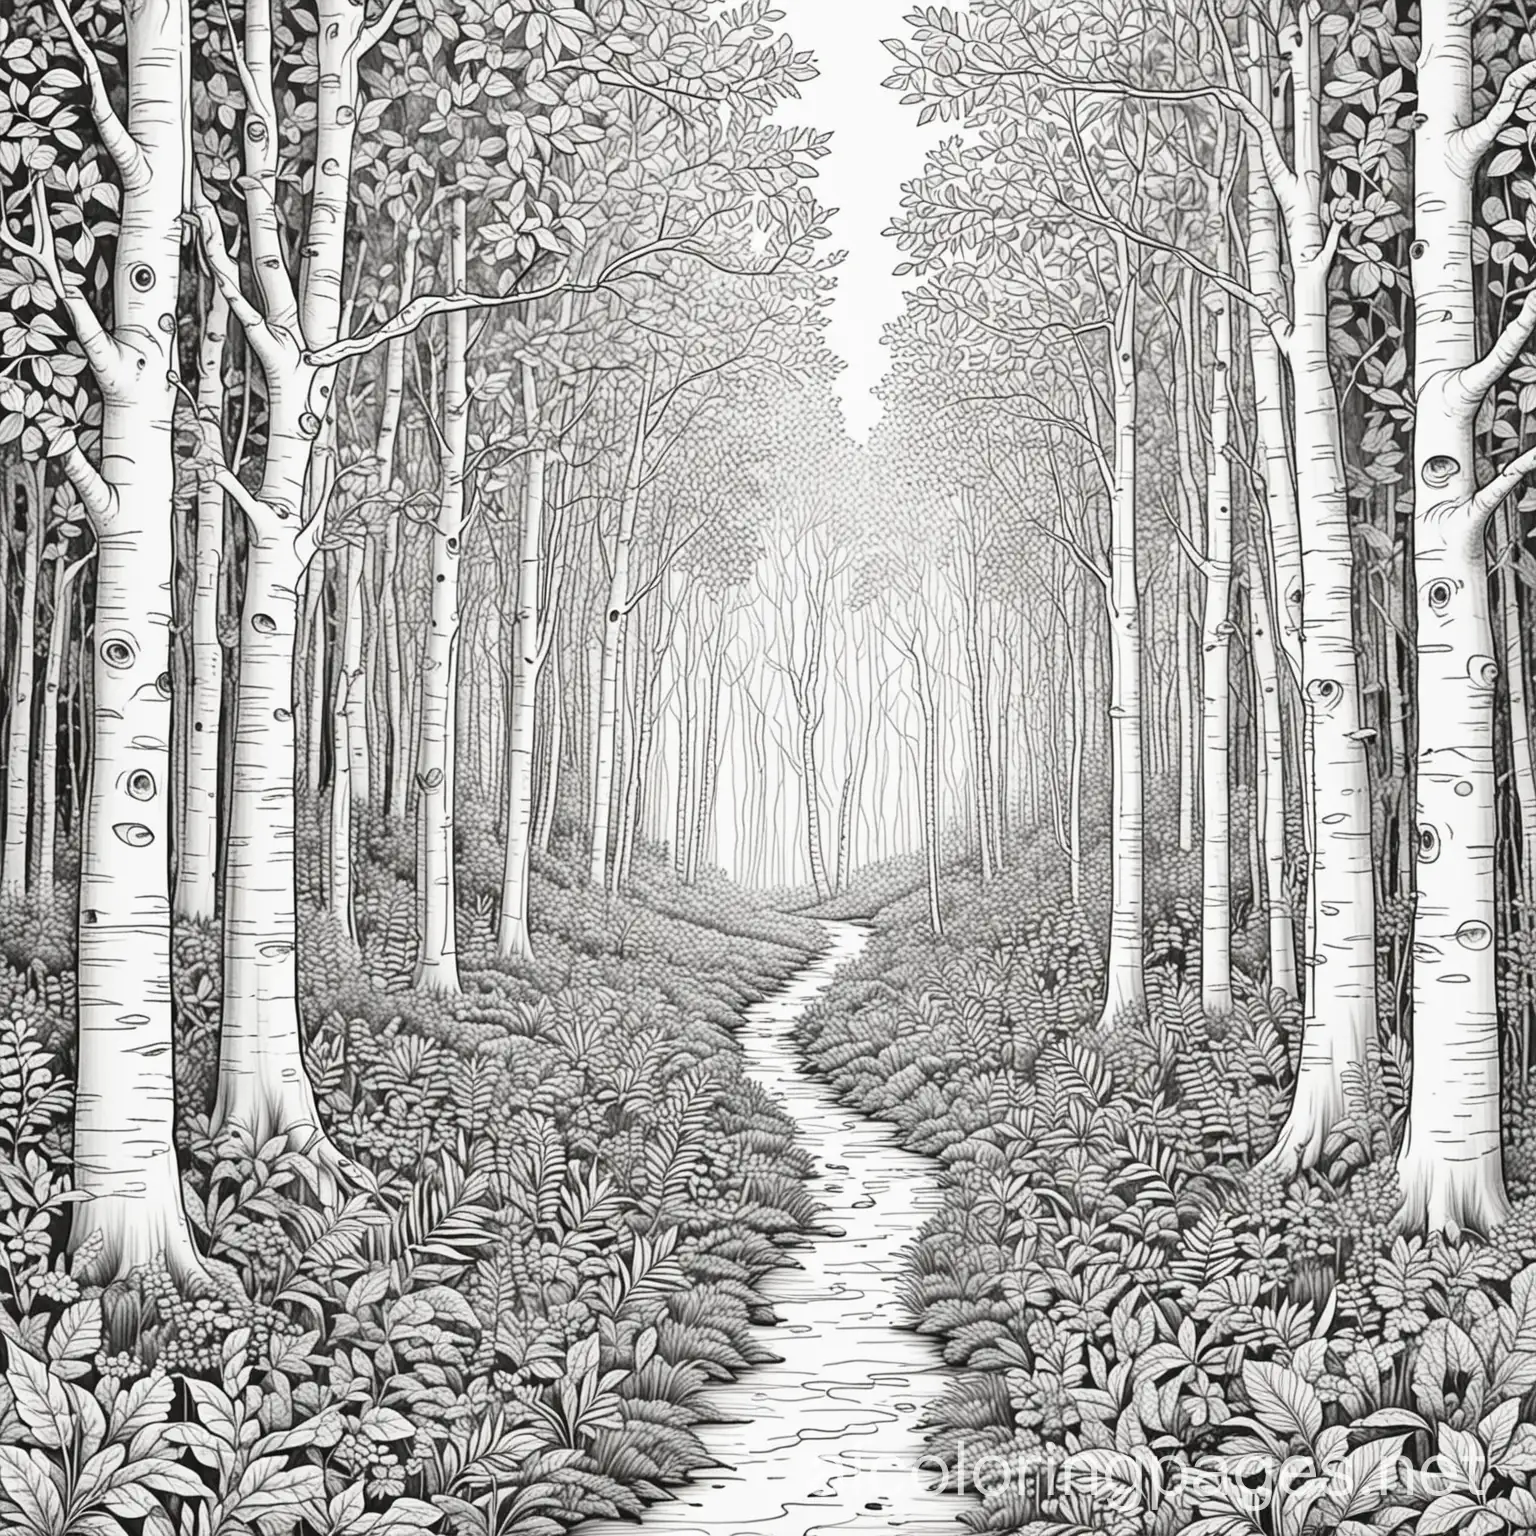 Nature, beautiful forest, Coloring Page, black and white, line art, white background, Simplicity, Ample White Space, Coloring Page, black and white, line art, white background, Simplicity, Ample White Space. The background of the coloring page is plain white to make it easy for young children to color within the lines. The outlines of all the subjects are easy to distinguish, making it simple for kids to color without too much difficulty